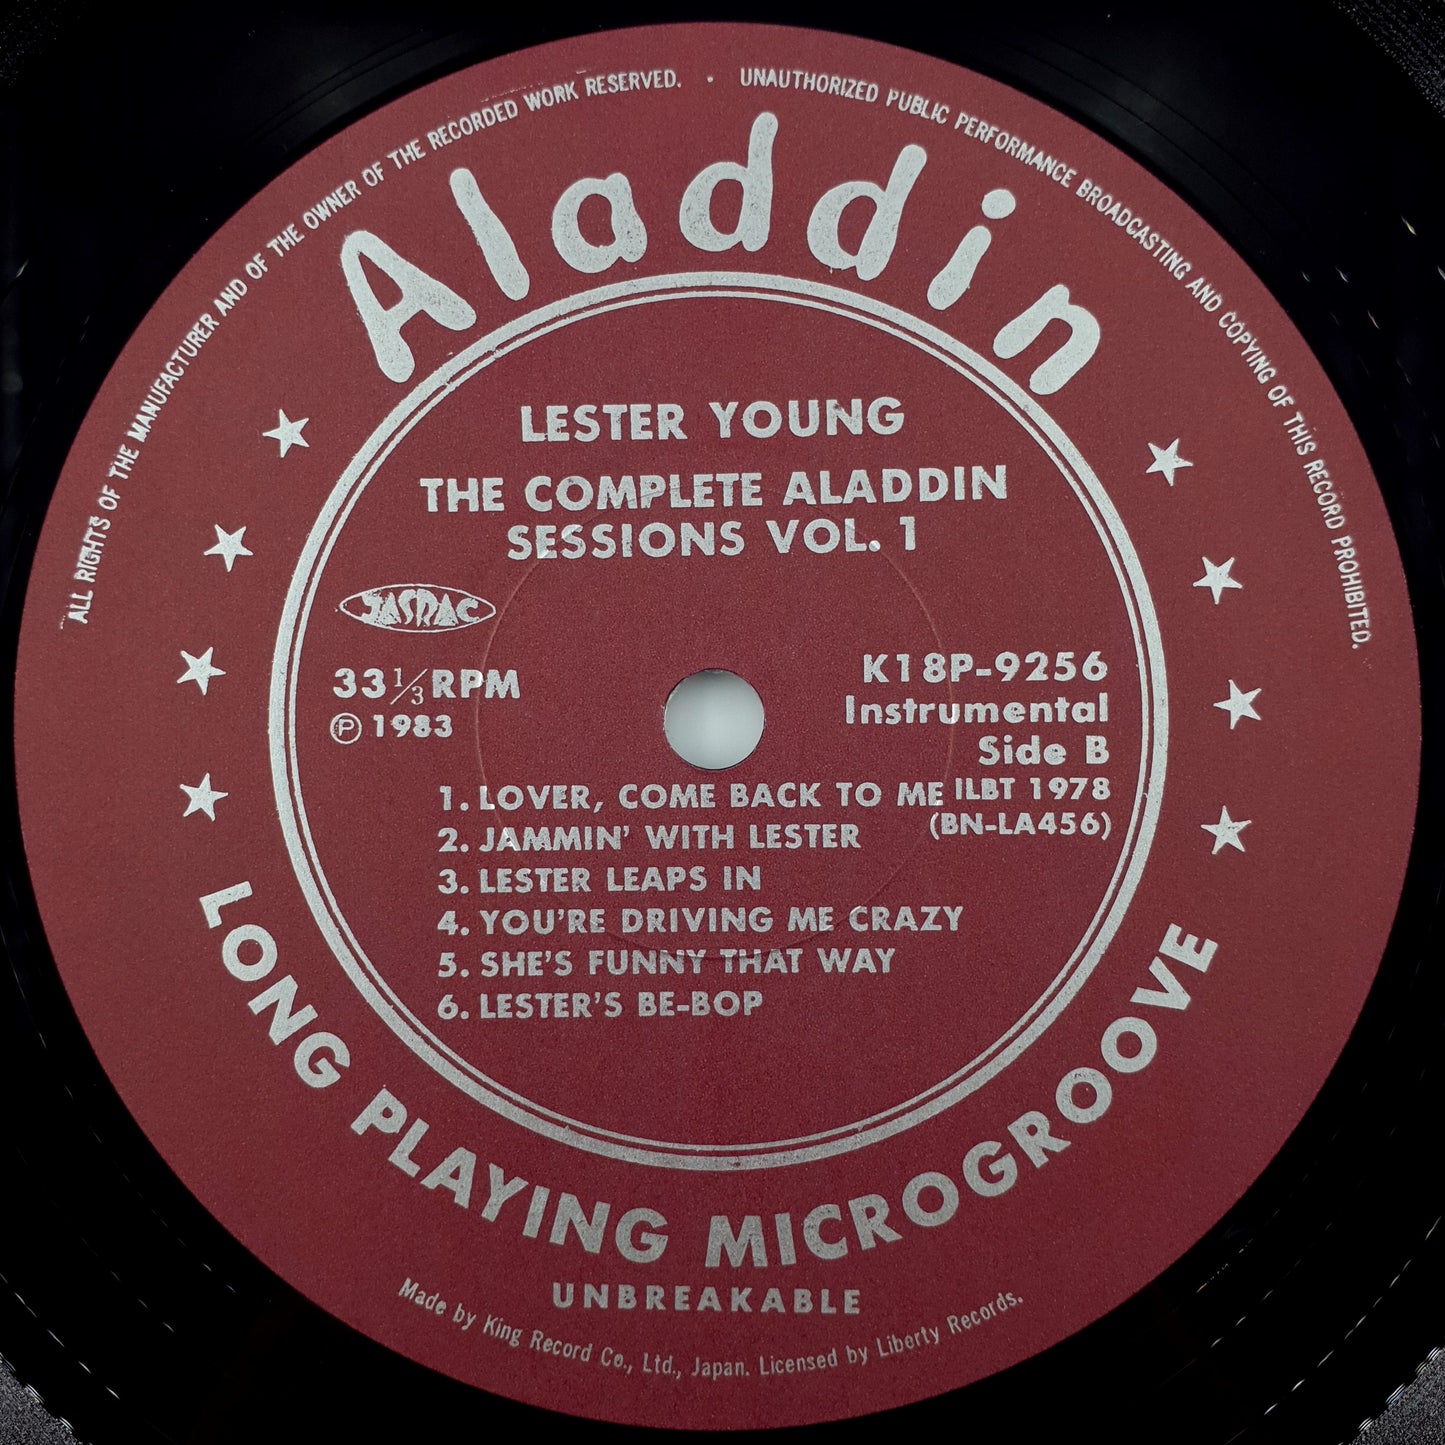 Lester Young – The Complete Aladdin Sessions Vol. 1